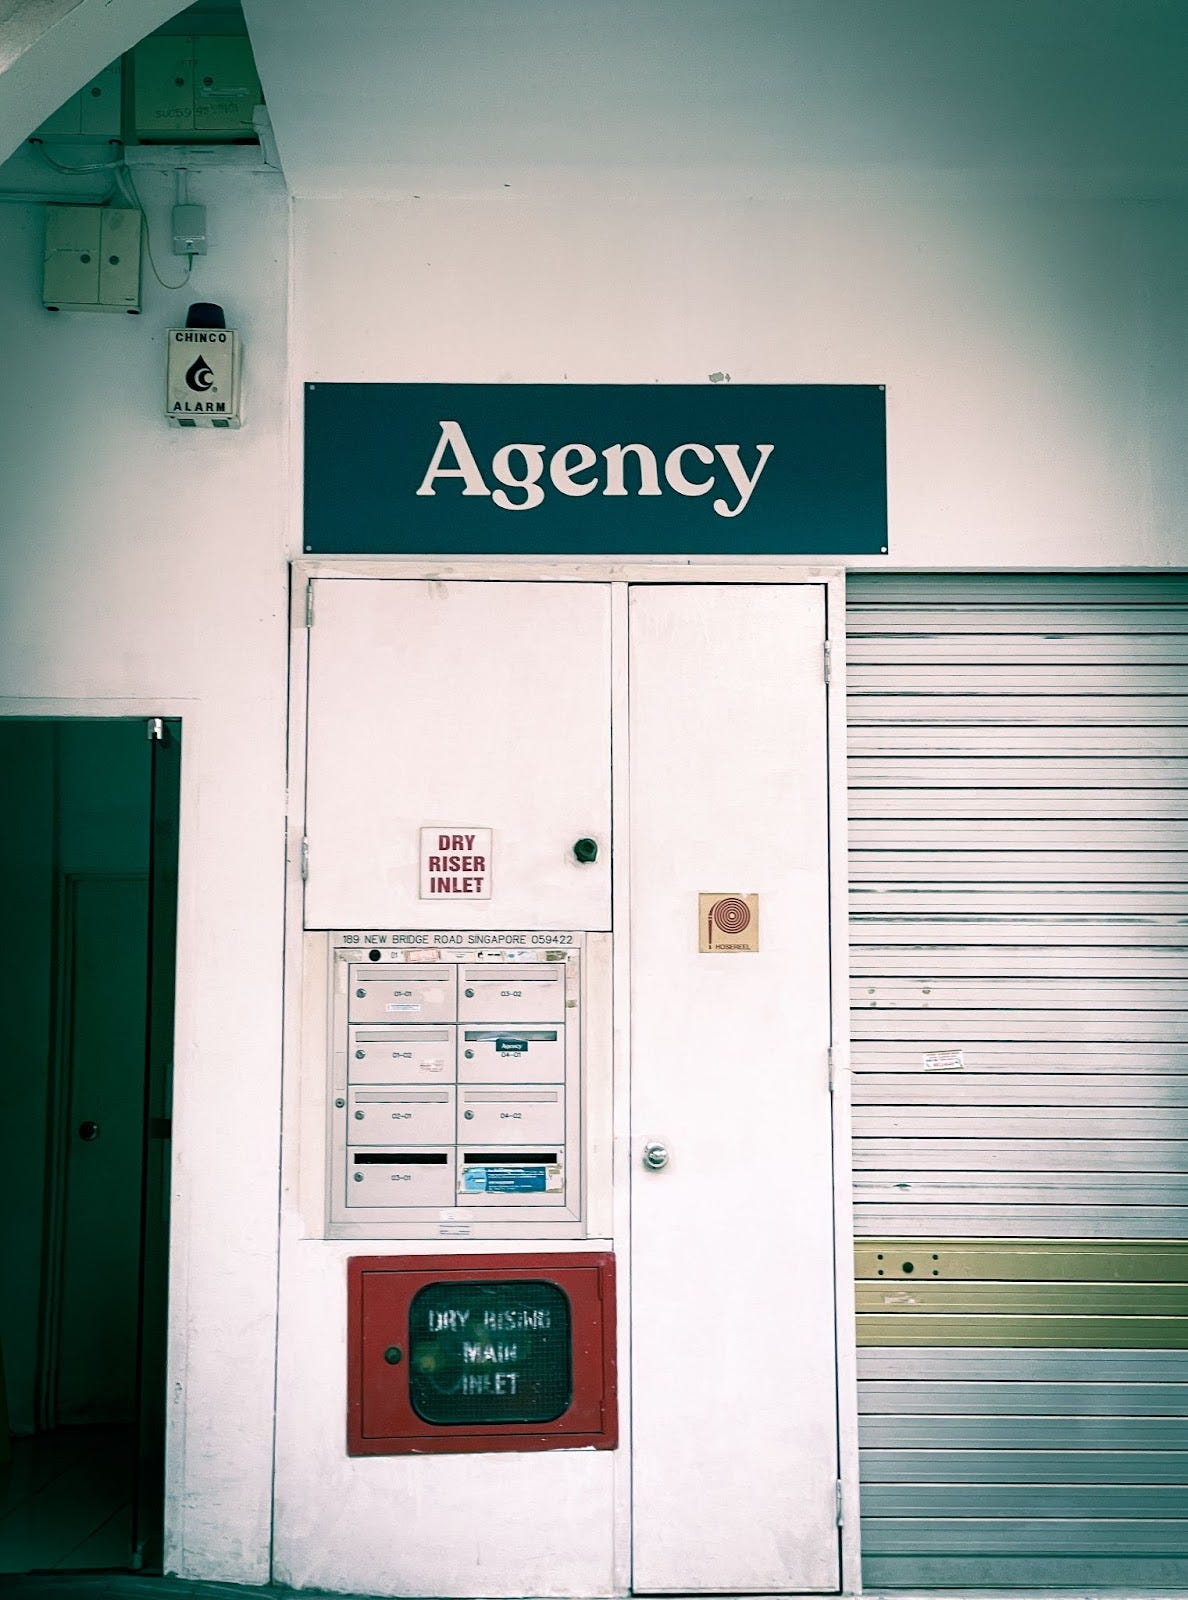 Agency finds a home